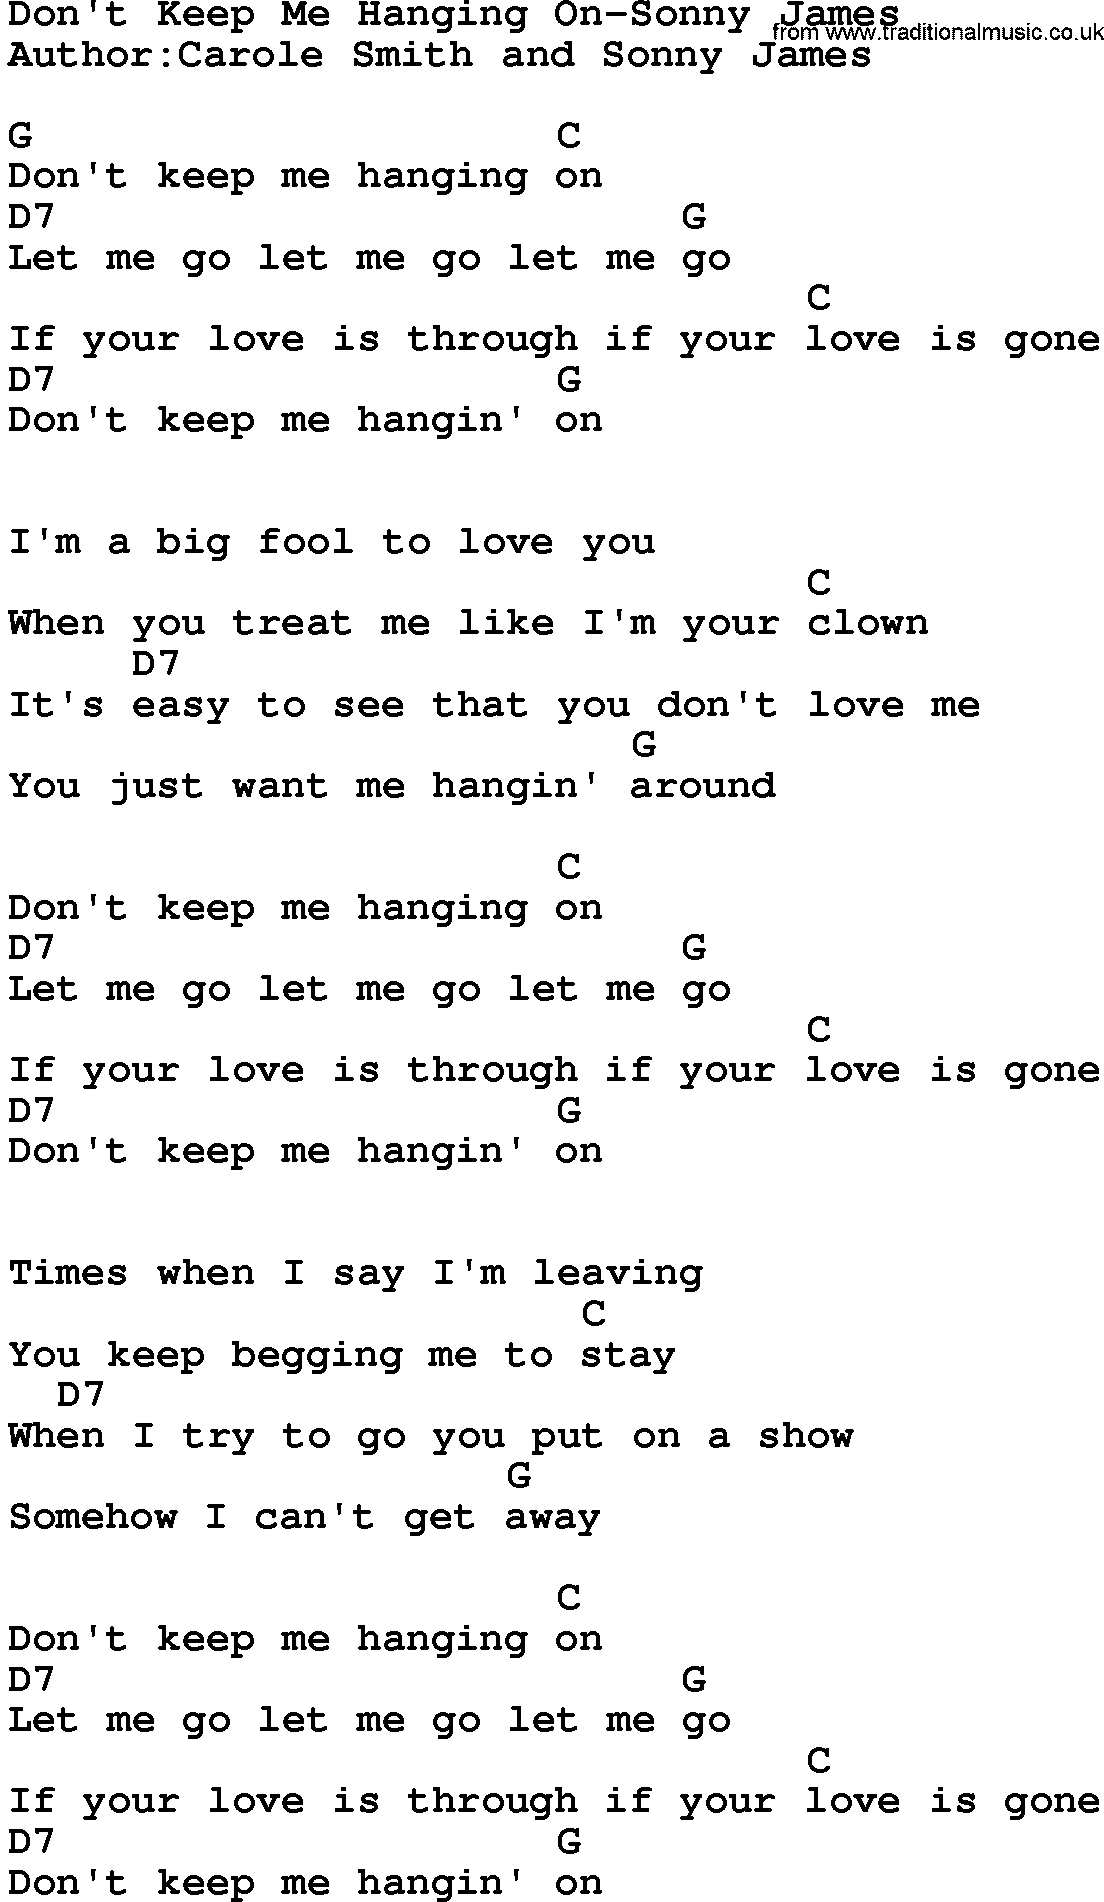 Country music song: Don't Keep Me Hanging On-Sonny James  lyrics and chords